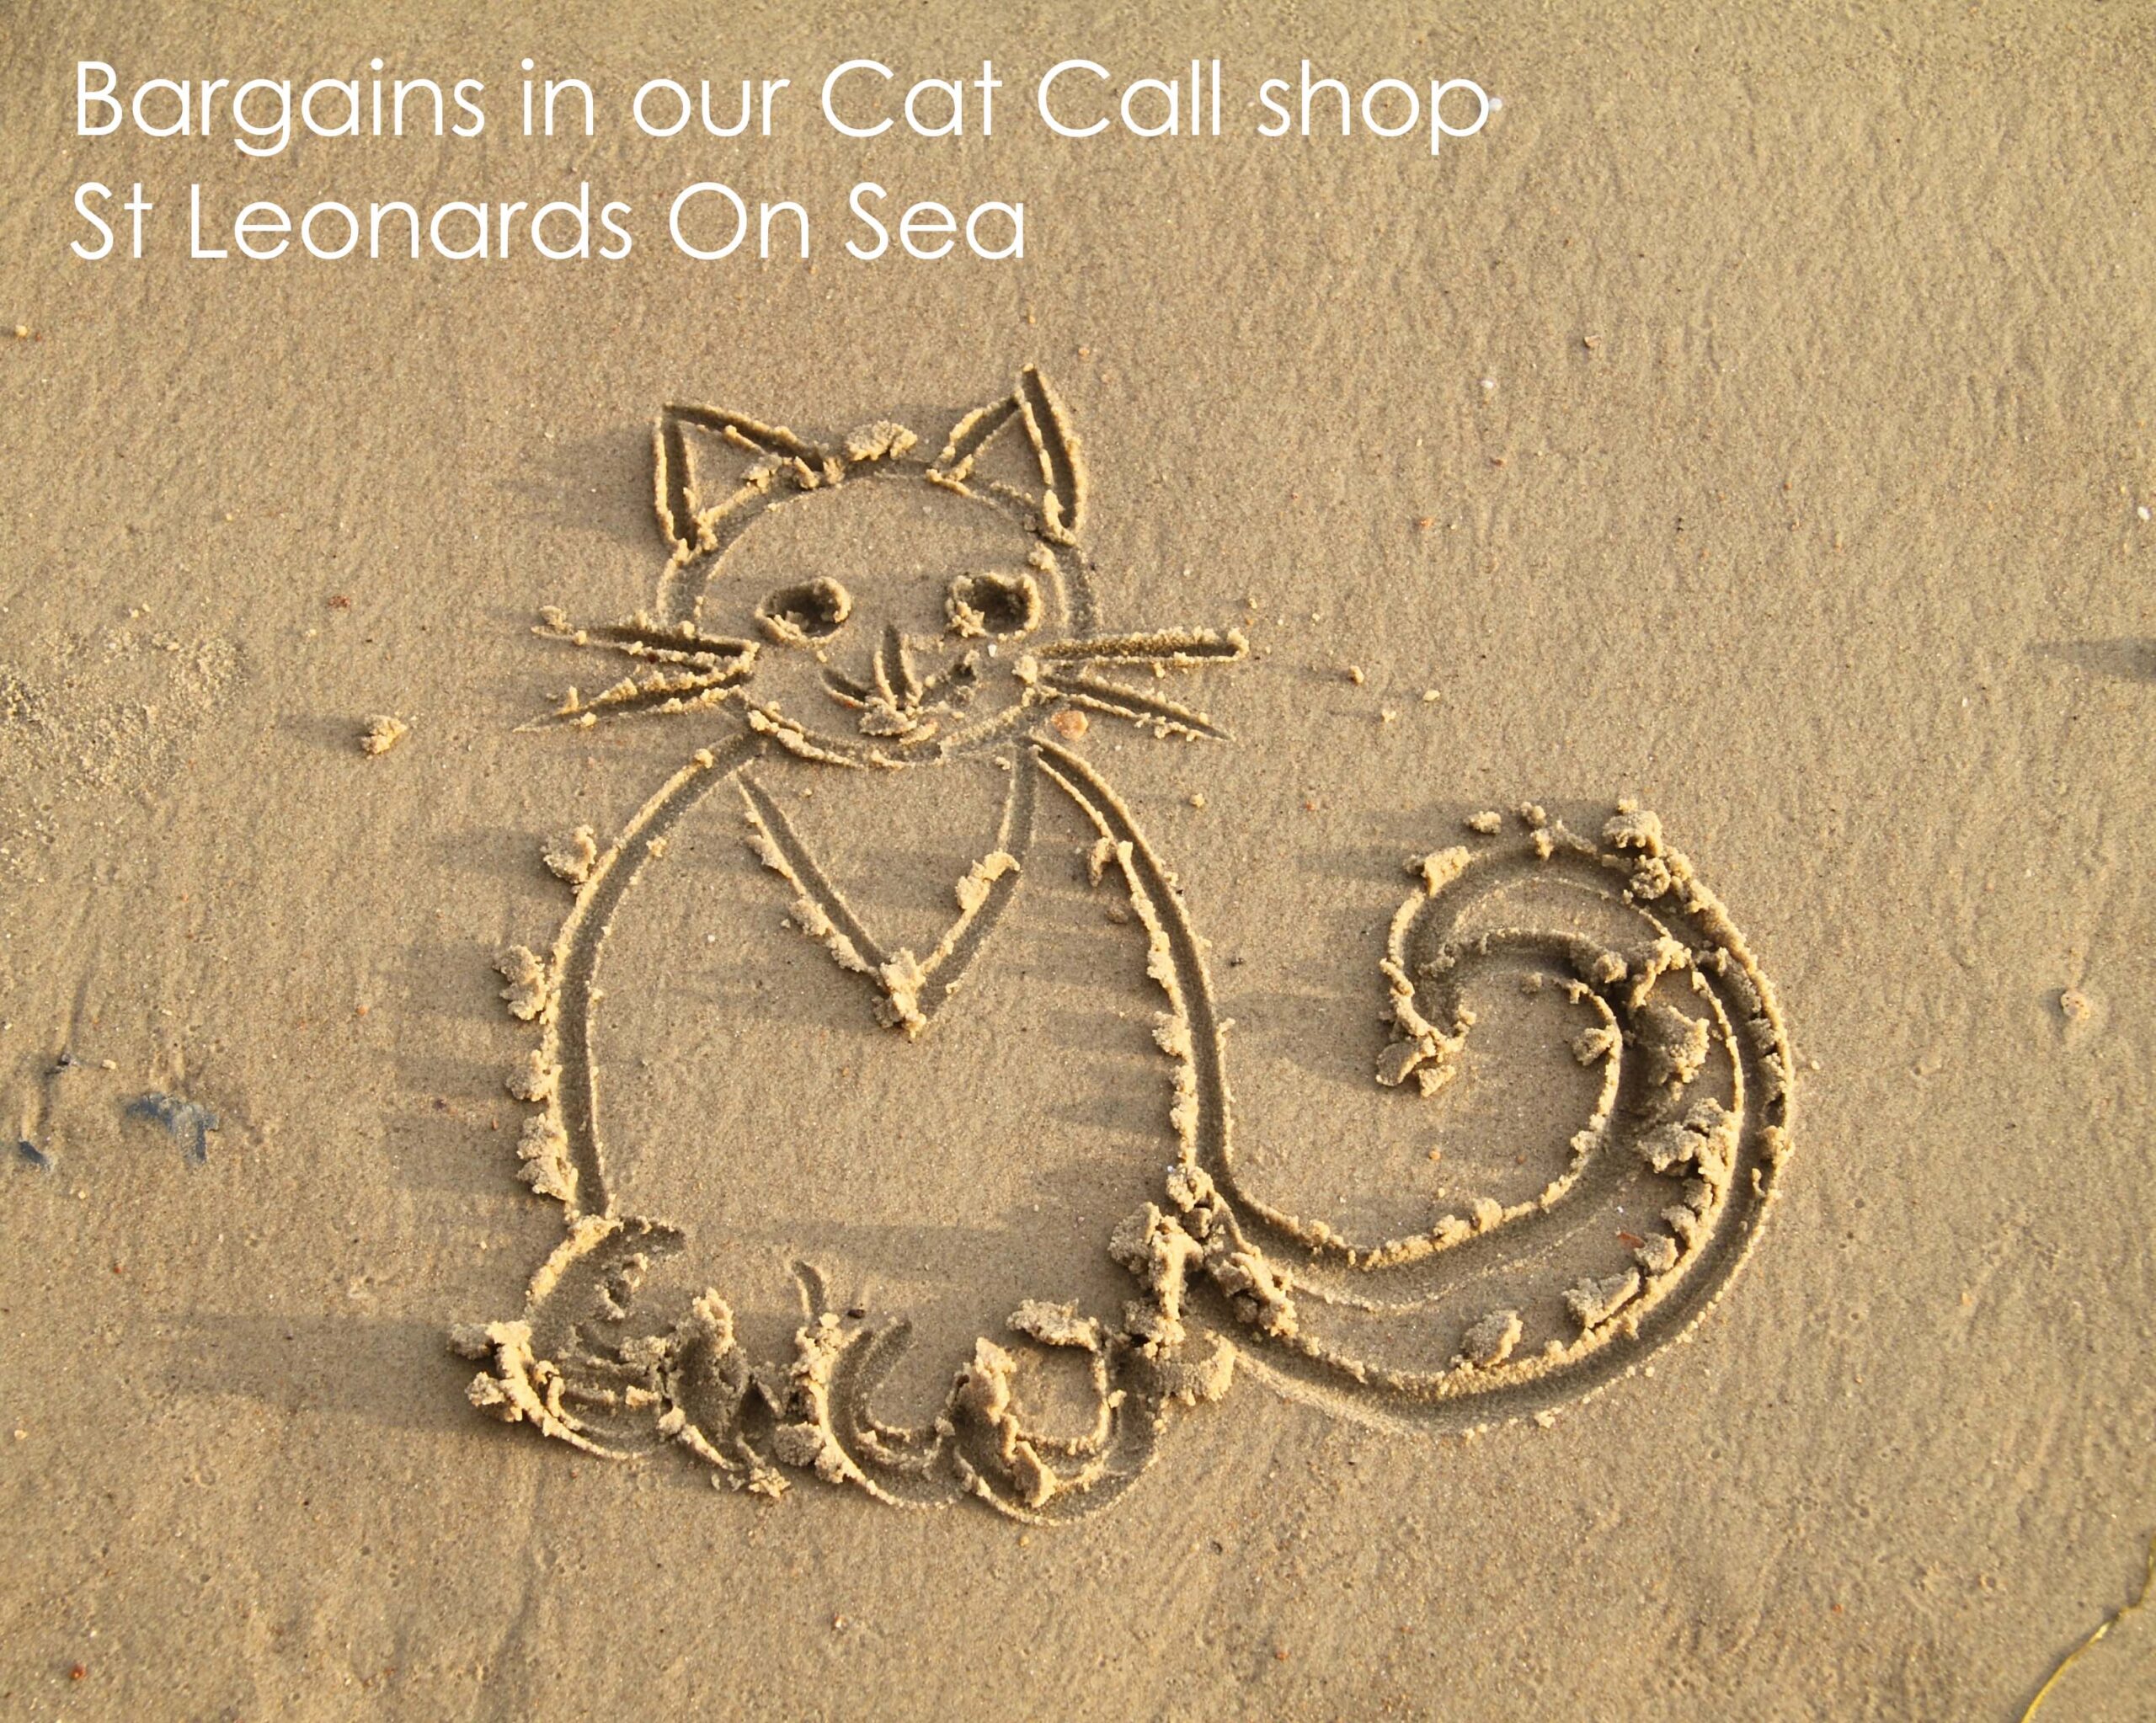 Bargains in our Cat Call shop